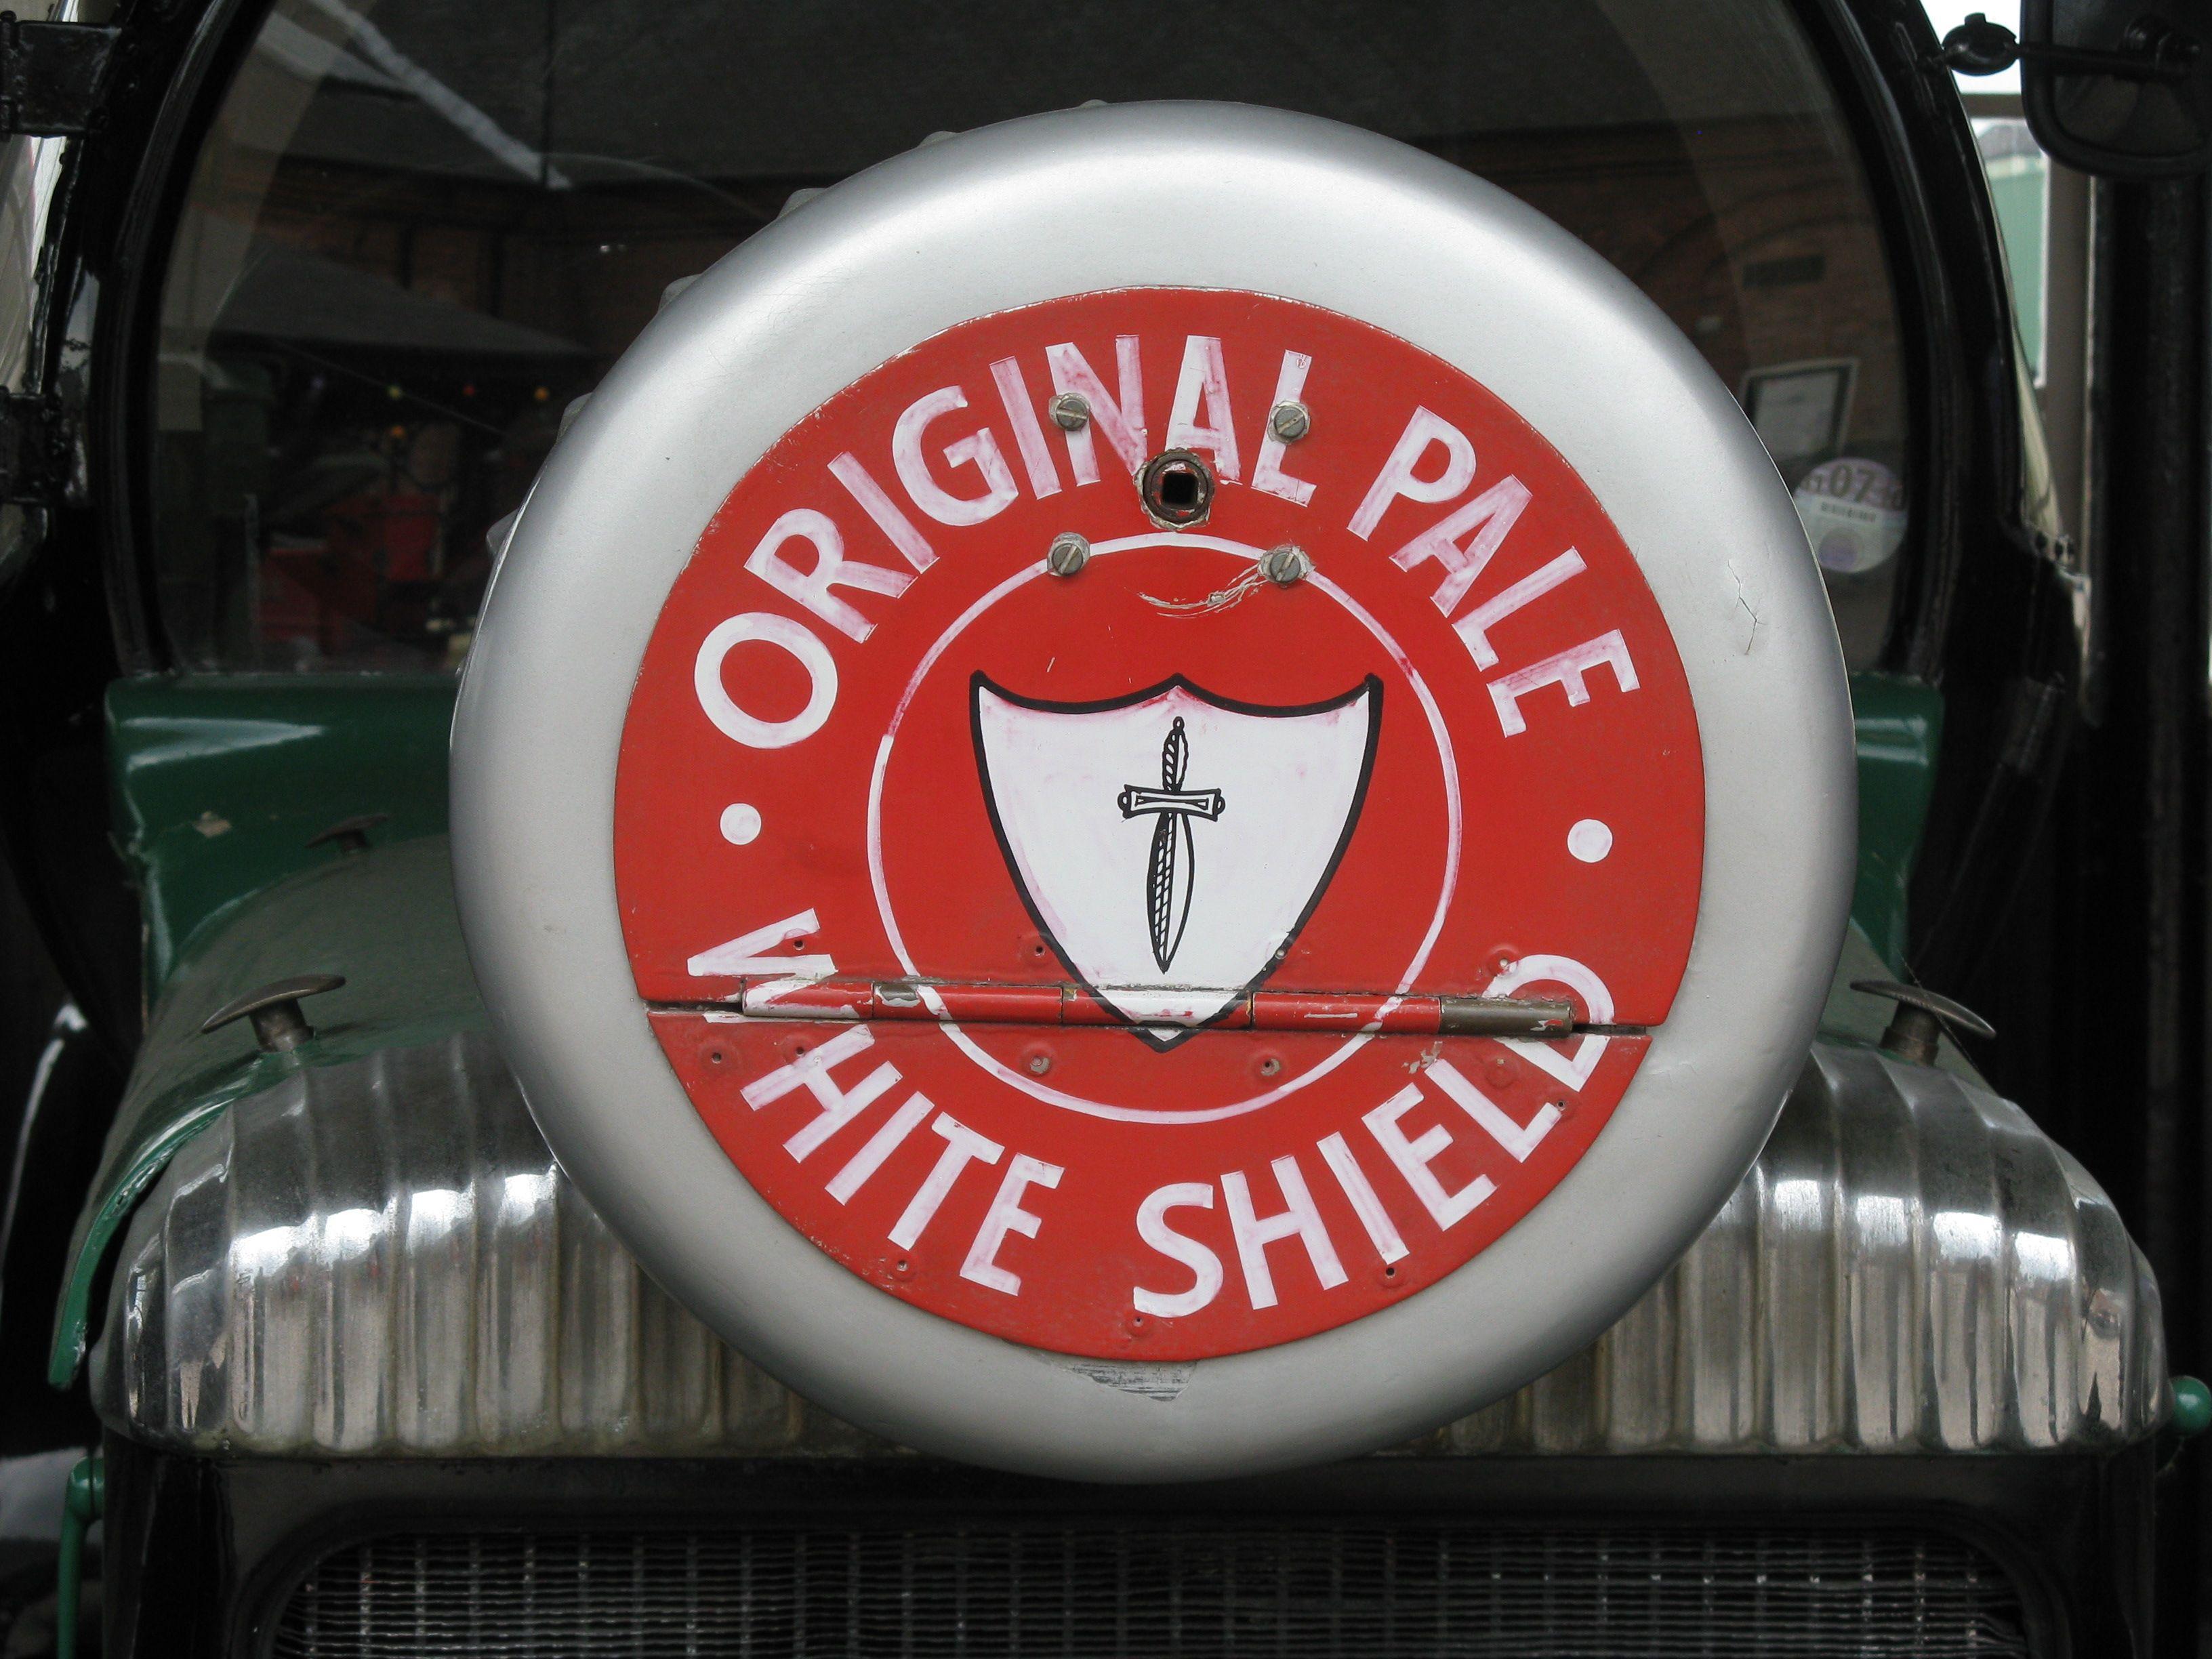 Red and White Shield Automotive Logo - File:The 'White Shield' car - geograph.org.uk - 1890000.jpg ...